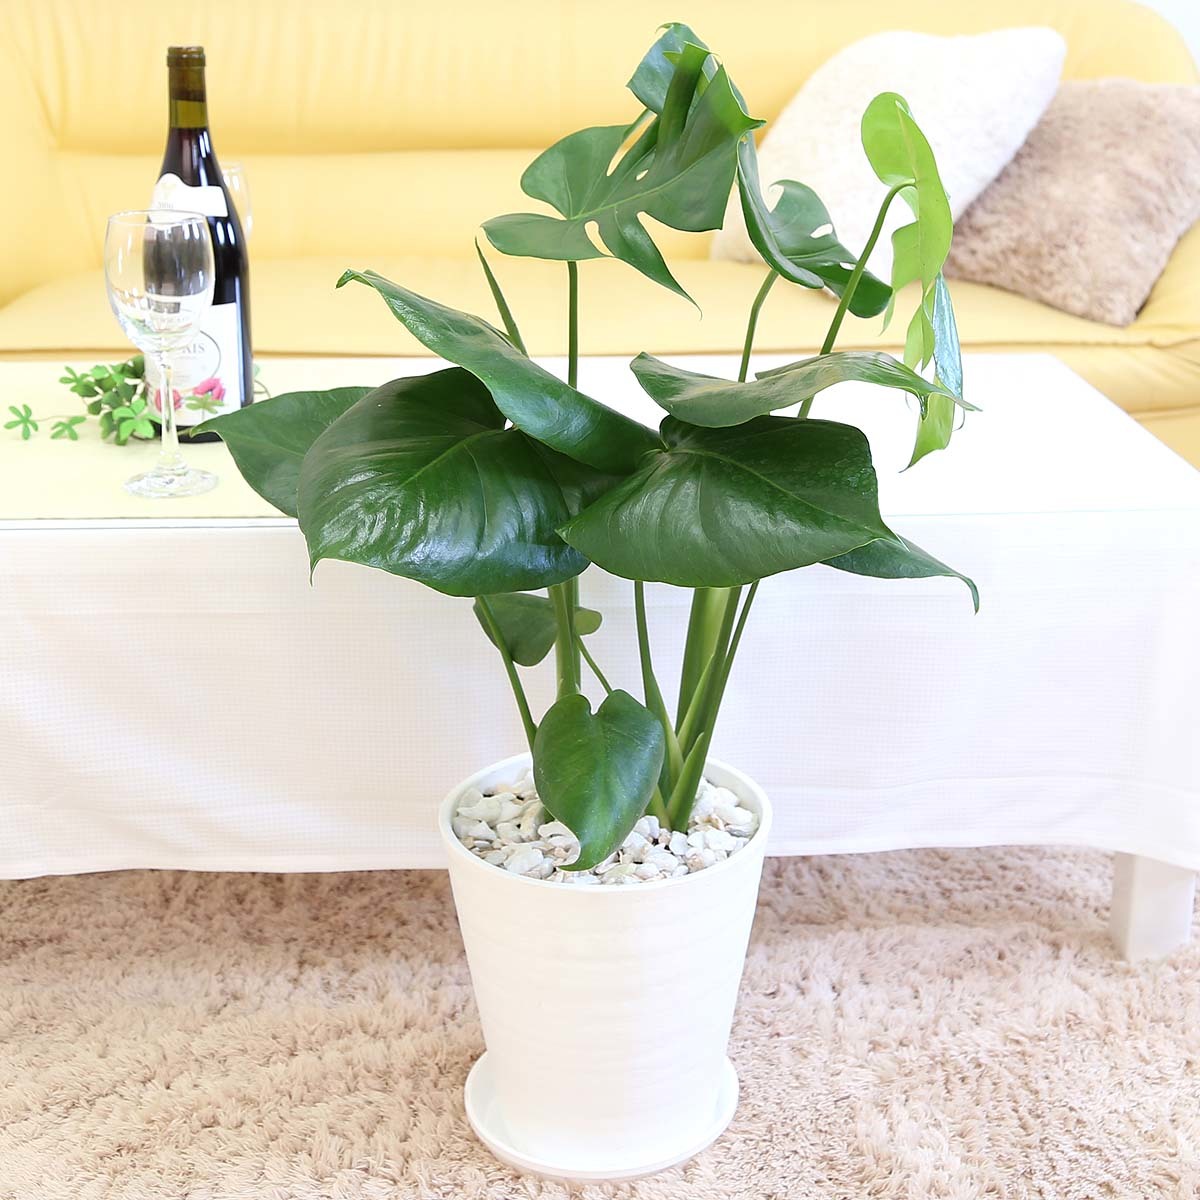  decorative plant monstera 7 number is possible to choose Sera art pot free shipping 